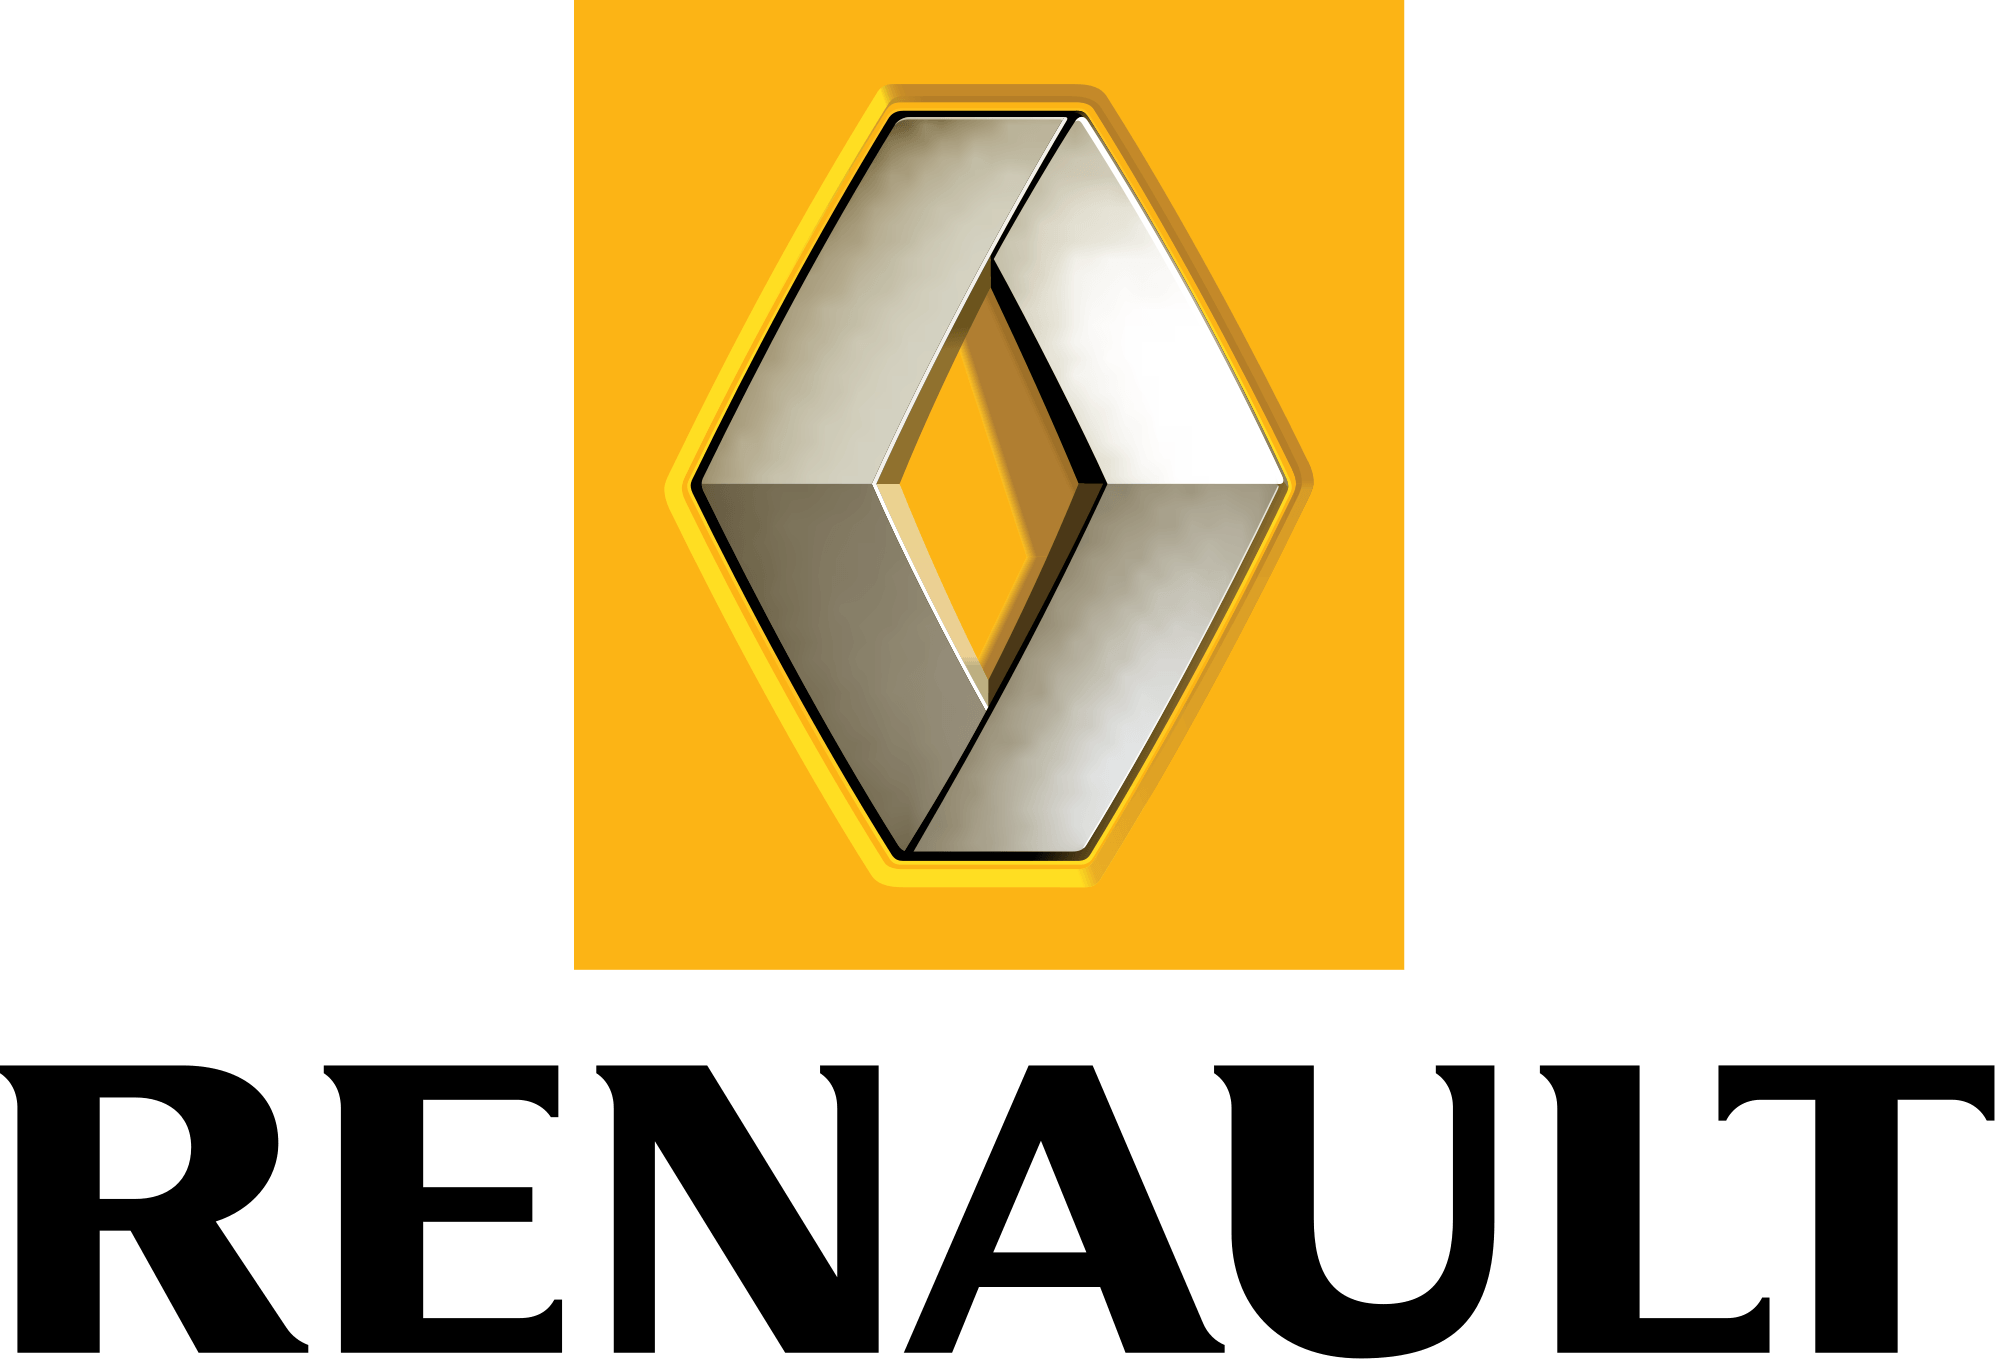 Silver with Diamond Shape Logo - Renault Logo, Renault Car Symbol Meaning and History | Car Brand ...